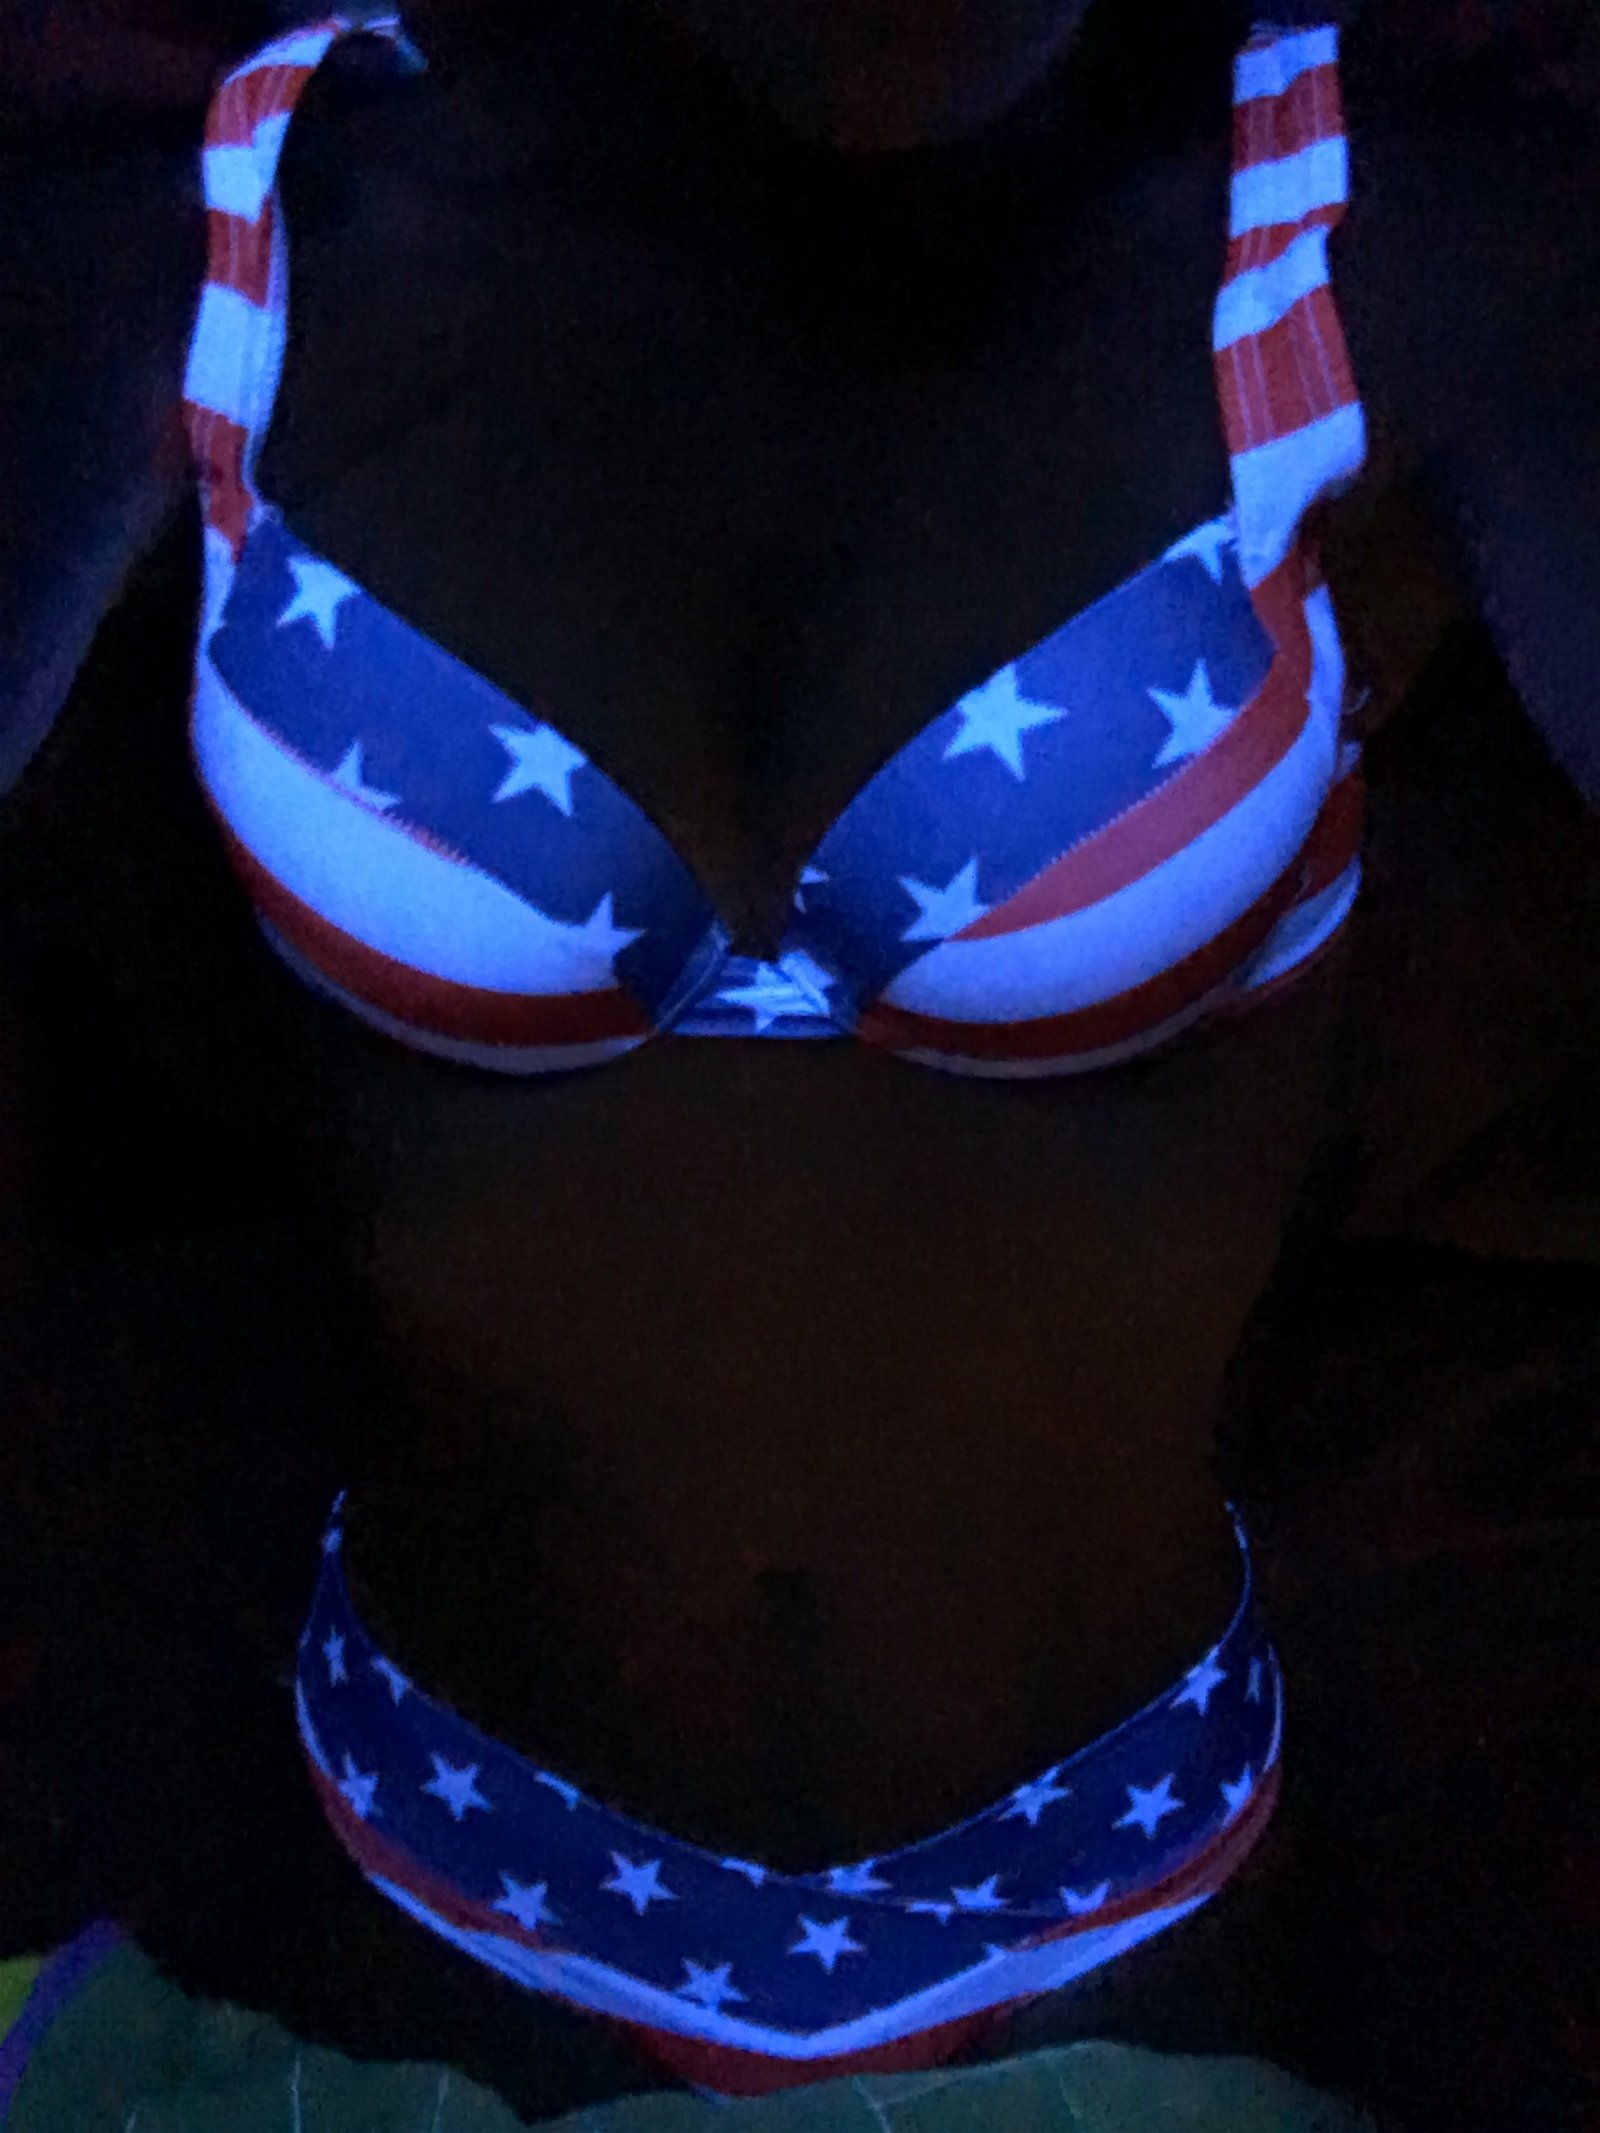 Photo by eddieslildarlin with the username @eddieslildarlin, who is a verified user,  July 14, 2019 at 5:18 PM. The post is about the topic Eld’slilslutt and the text says '#Me #RedWhiteBlue #Blacklightfun #Ownedby @AtongueforAnnie'